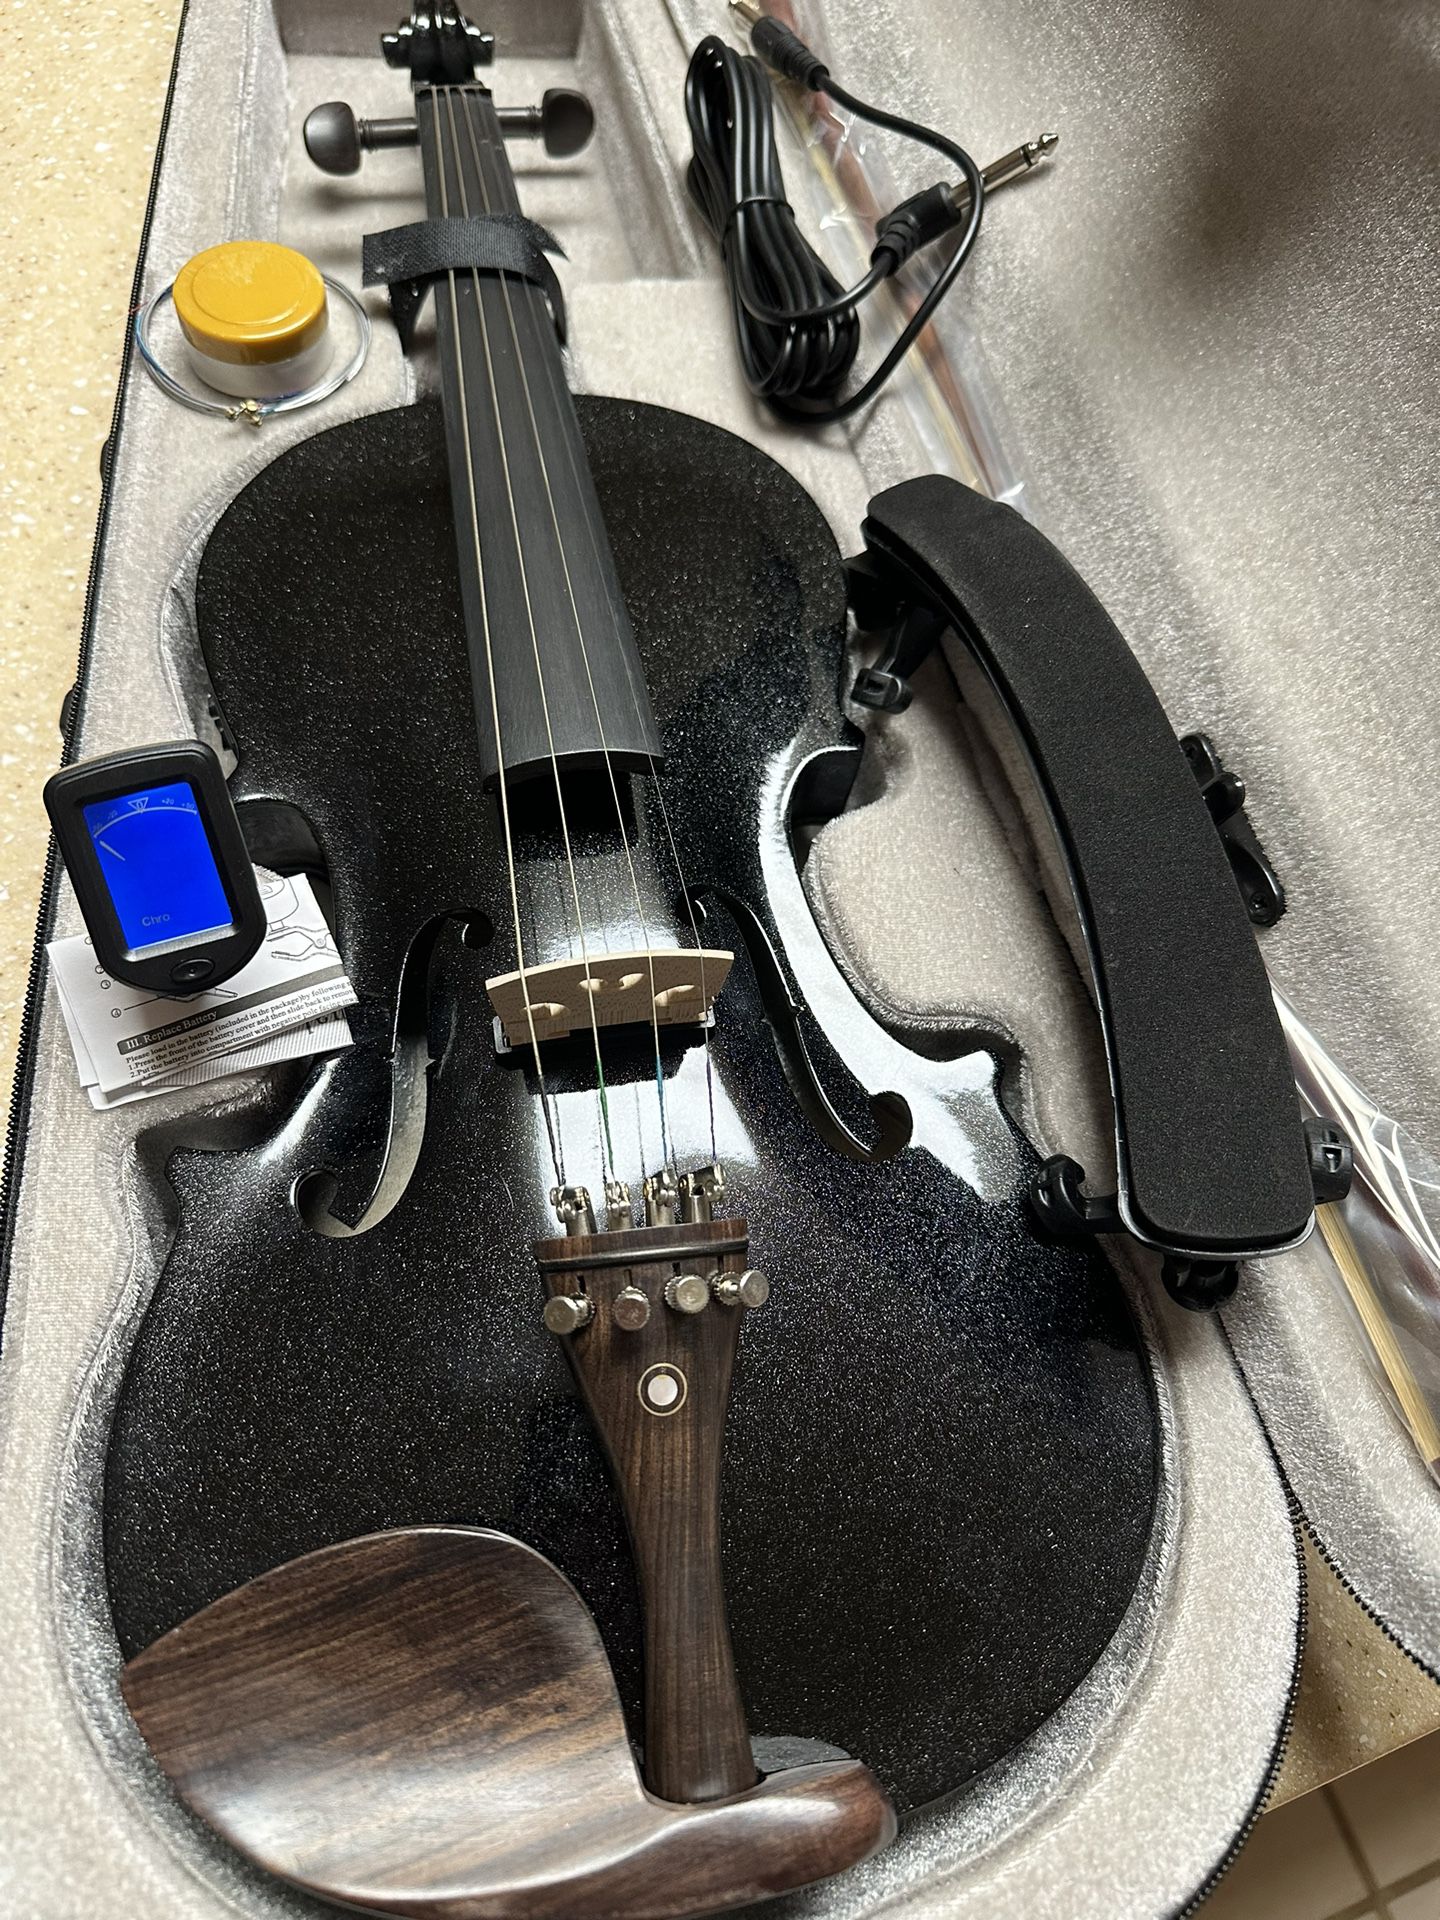 4/4 Black Electric Acoustic Violin with New Bow, Digital Tuner, Extra Strings, Shoulder Rest, Cable $160 Firm